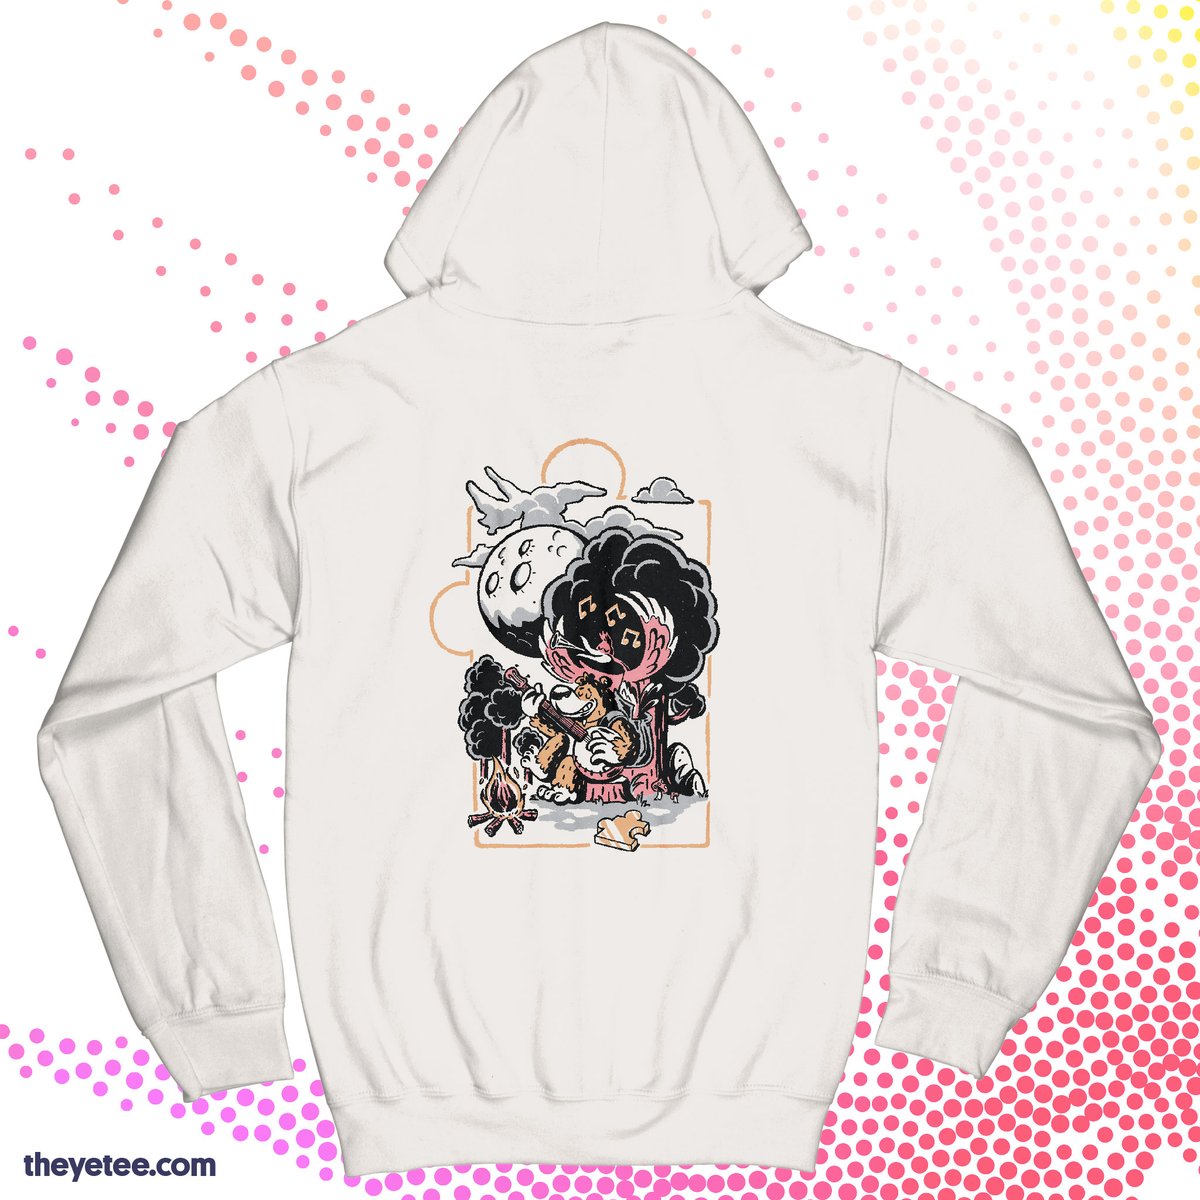 「Nothin' like a midnight strum on the ol'」|The Yetee 🌈のイラスト